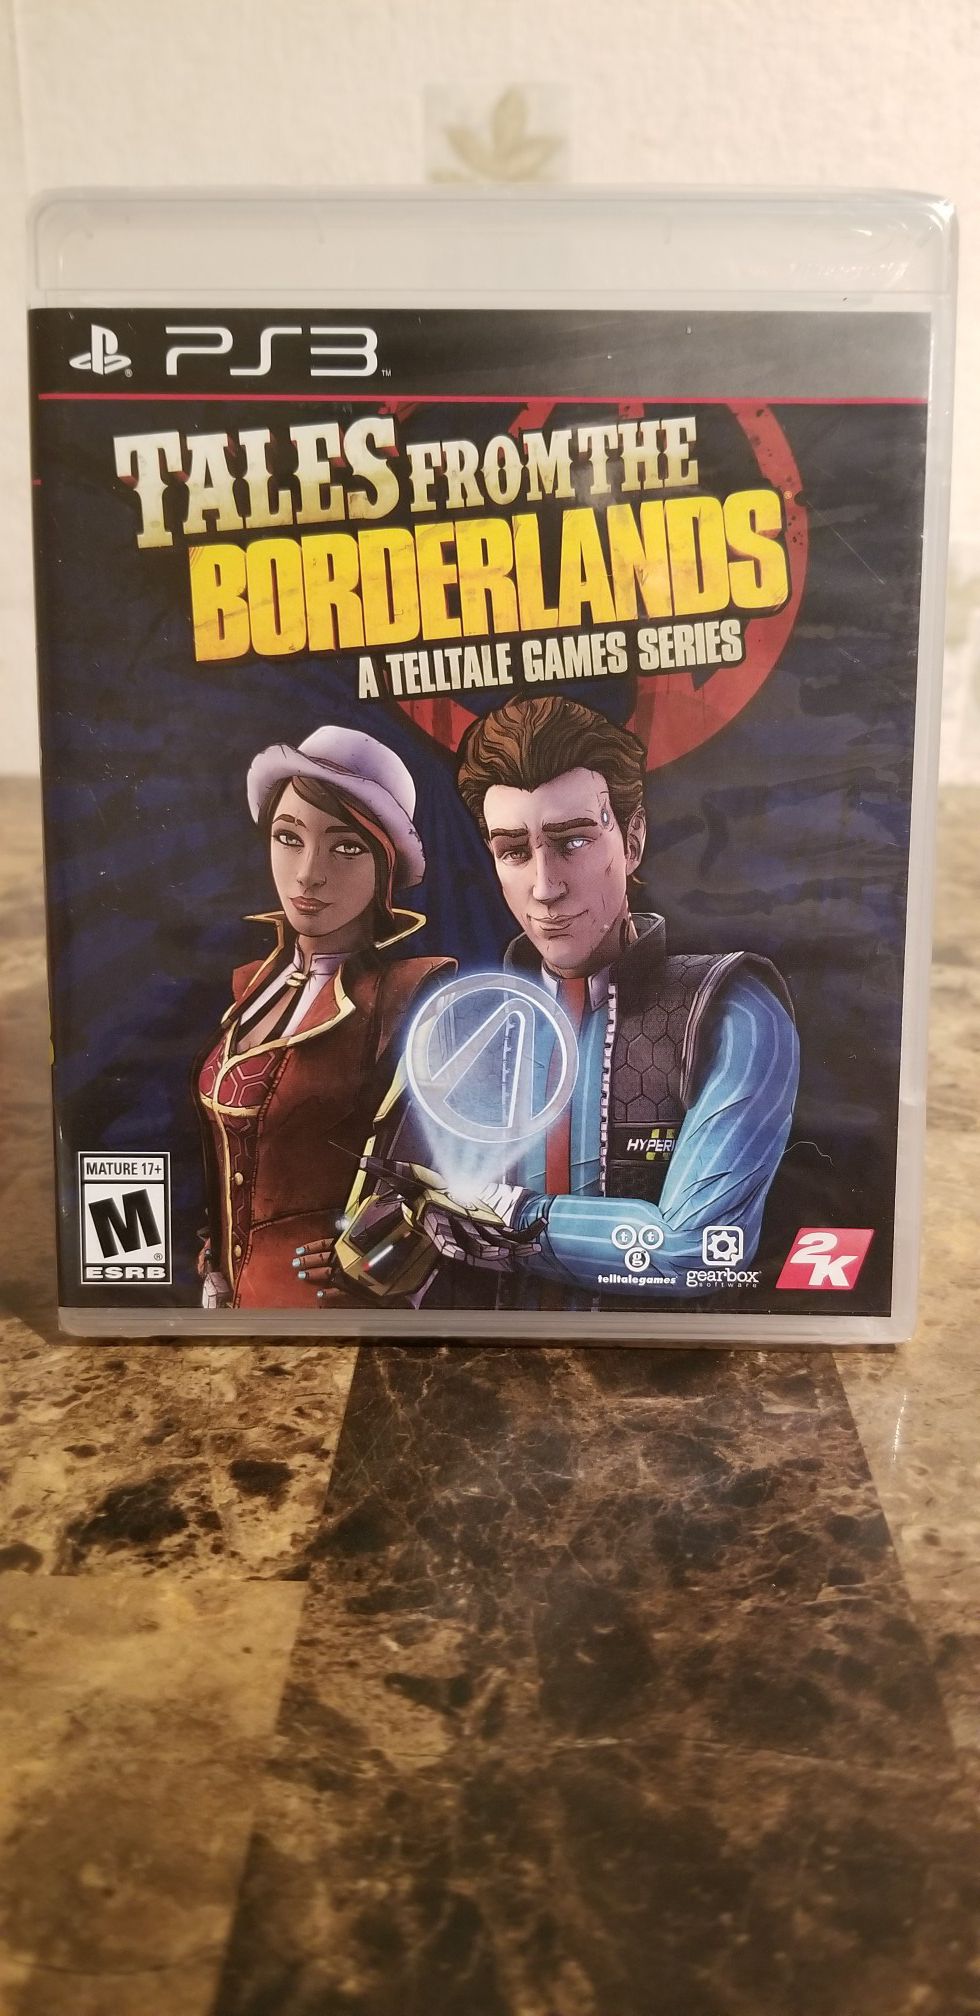 Playstation PS3 TALES FROM THE BORDERLANDS - A TELLETALE GAMES SERIES